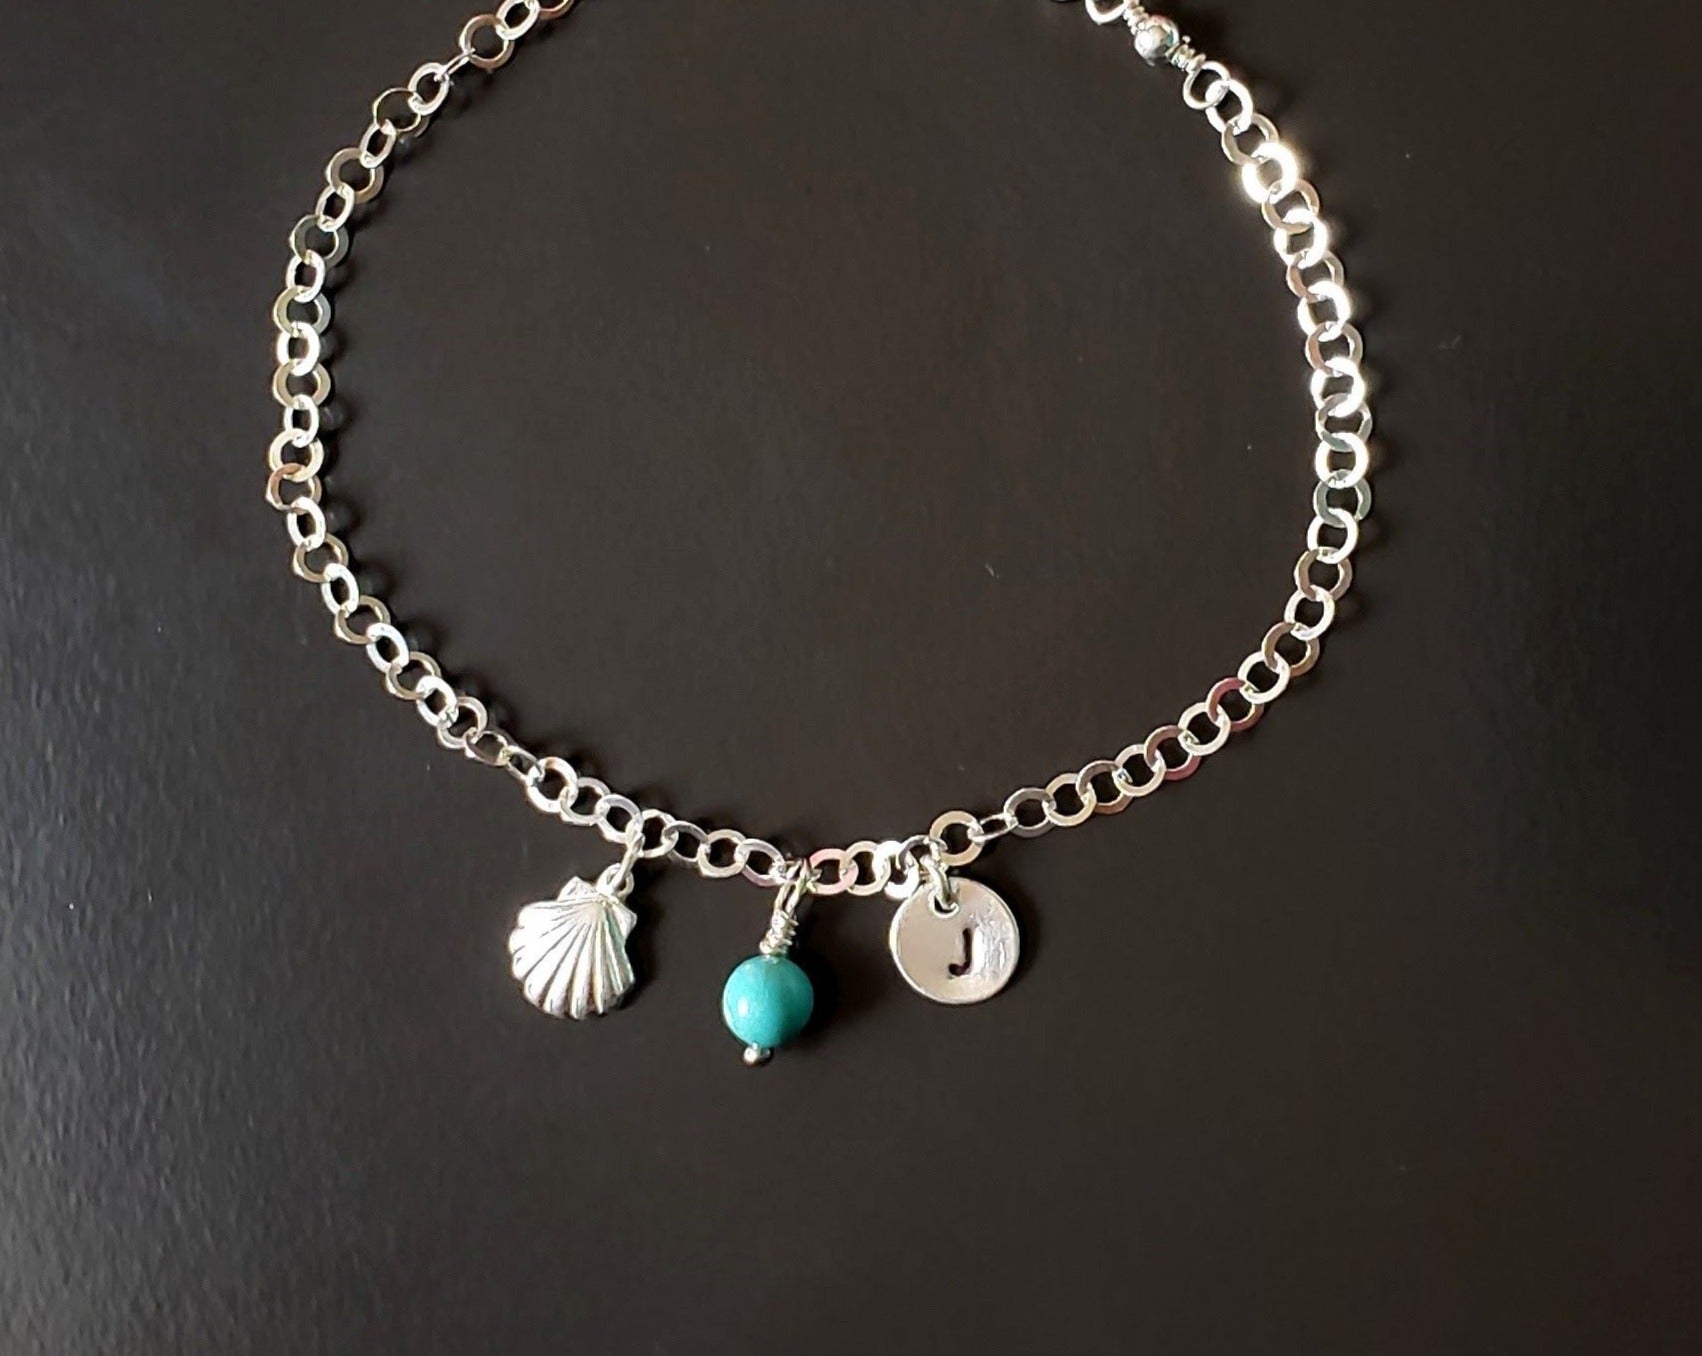 Deluxe Personalized Anklet-Ankle Bracelet, a shell, an round initial pendant and Turquoise birthstone pendant dangle from sparkly sterling silver chain, displayed on black background.